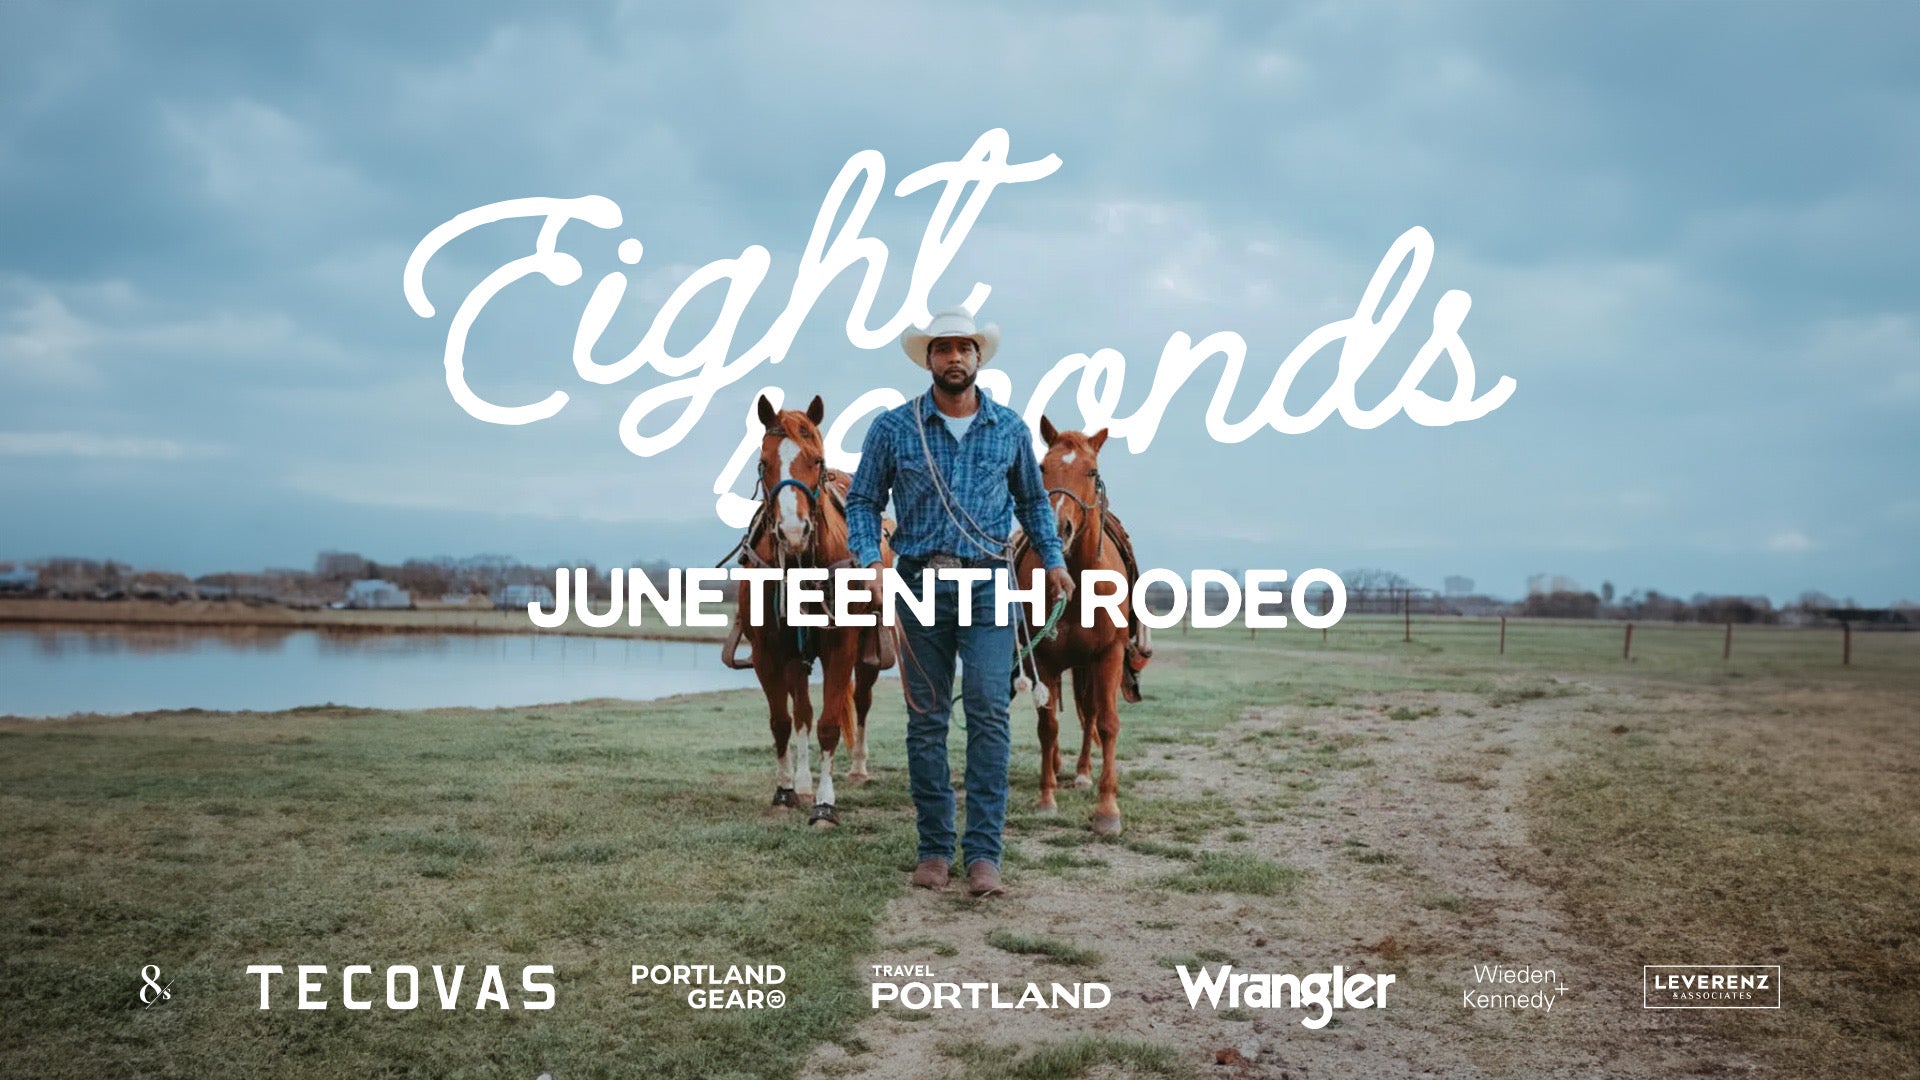 Celebrating Juneteenth and the 8 Seconds Rodeo